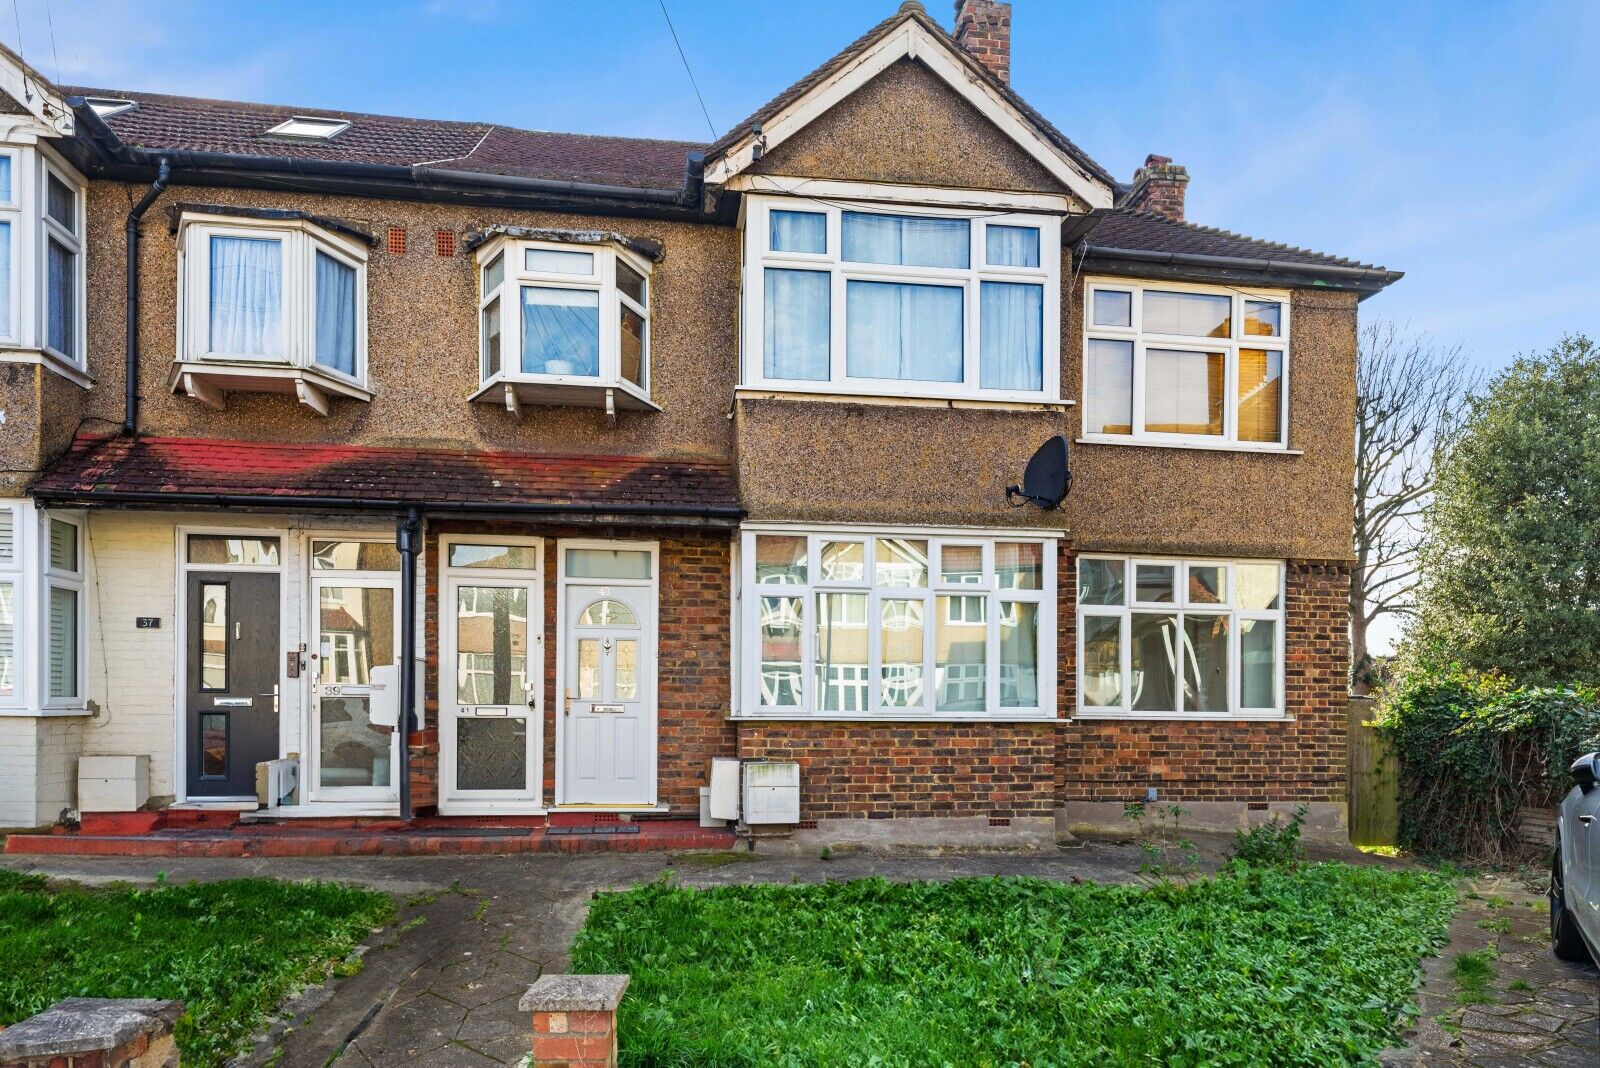 2 bedroom end terraced maisonette to rent, Available now Pentlands Close, Mitcham, CR4, main image